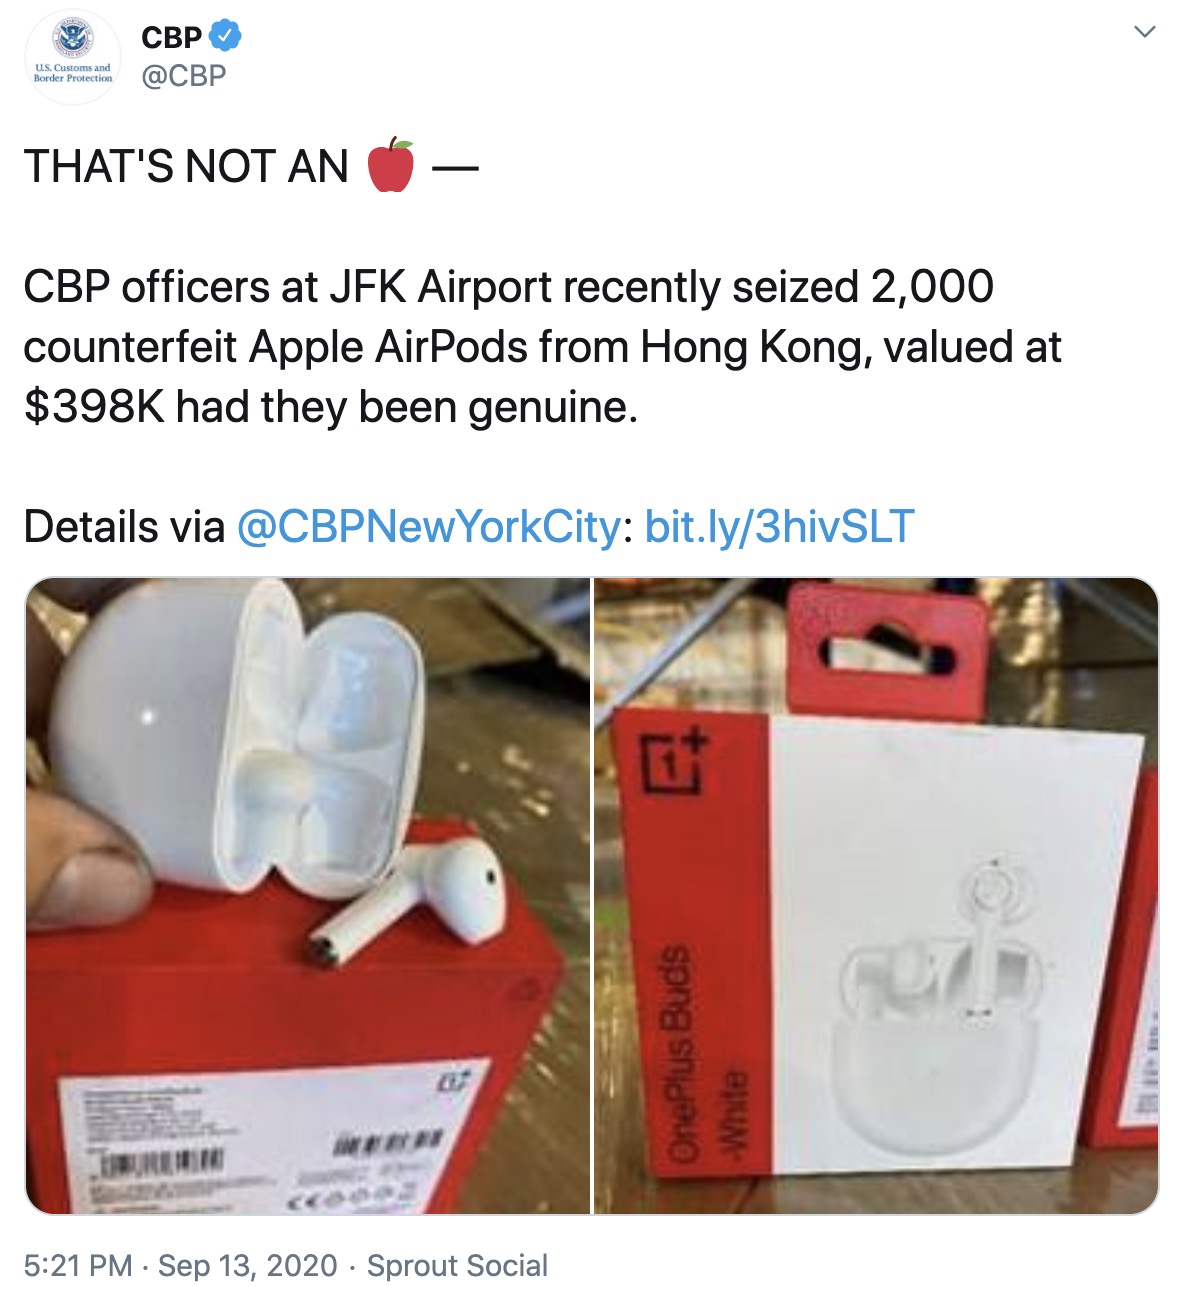 https://www.droid-life.com/wp-content/uploads/2020/09/CBP-OnePlus-Buds-AirPods.jpg